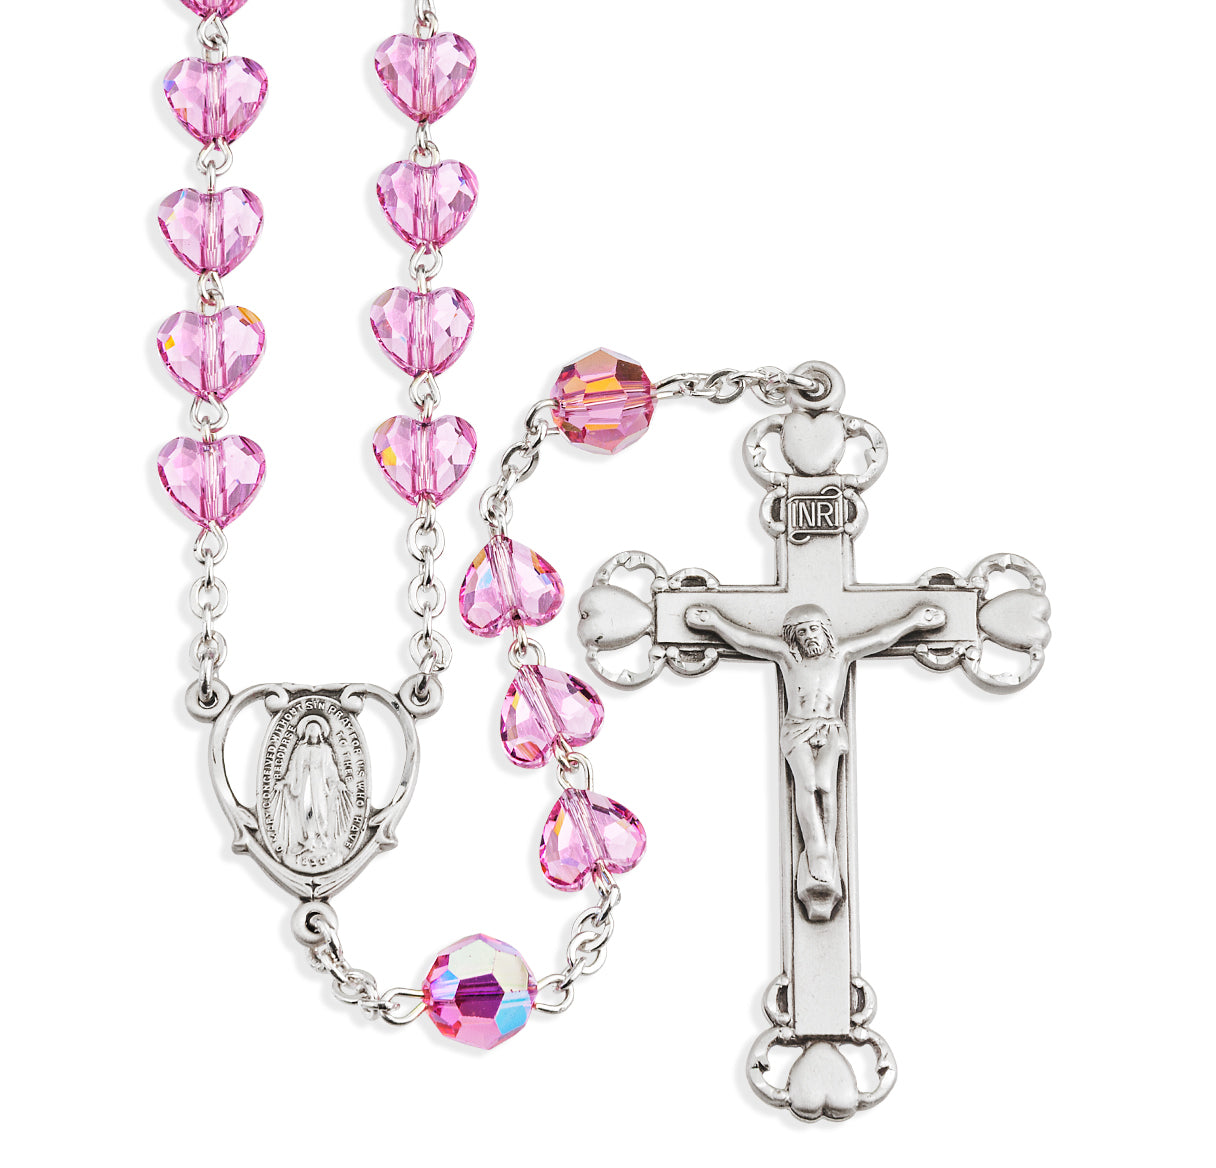 Sterling Silver Rosary Hand Made with Swarovski Crystal 8mm Pink Heart Shape Beads by HMH